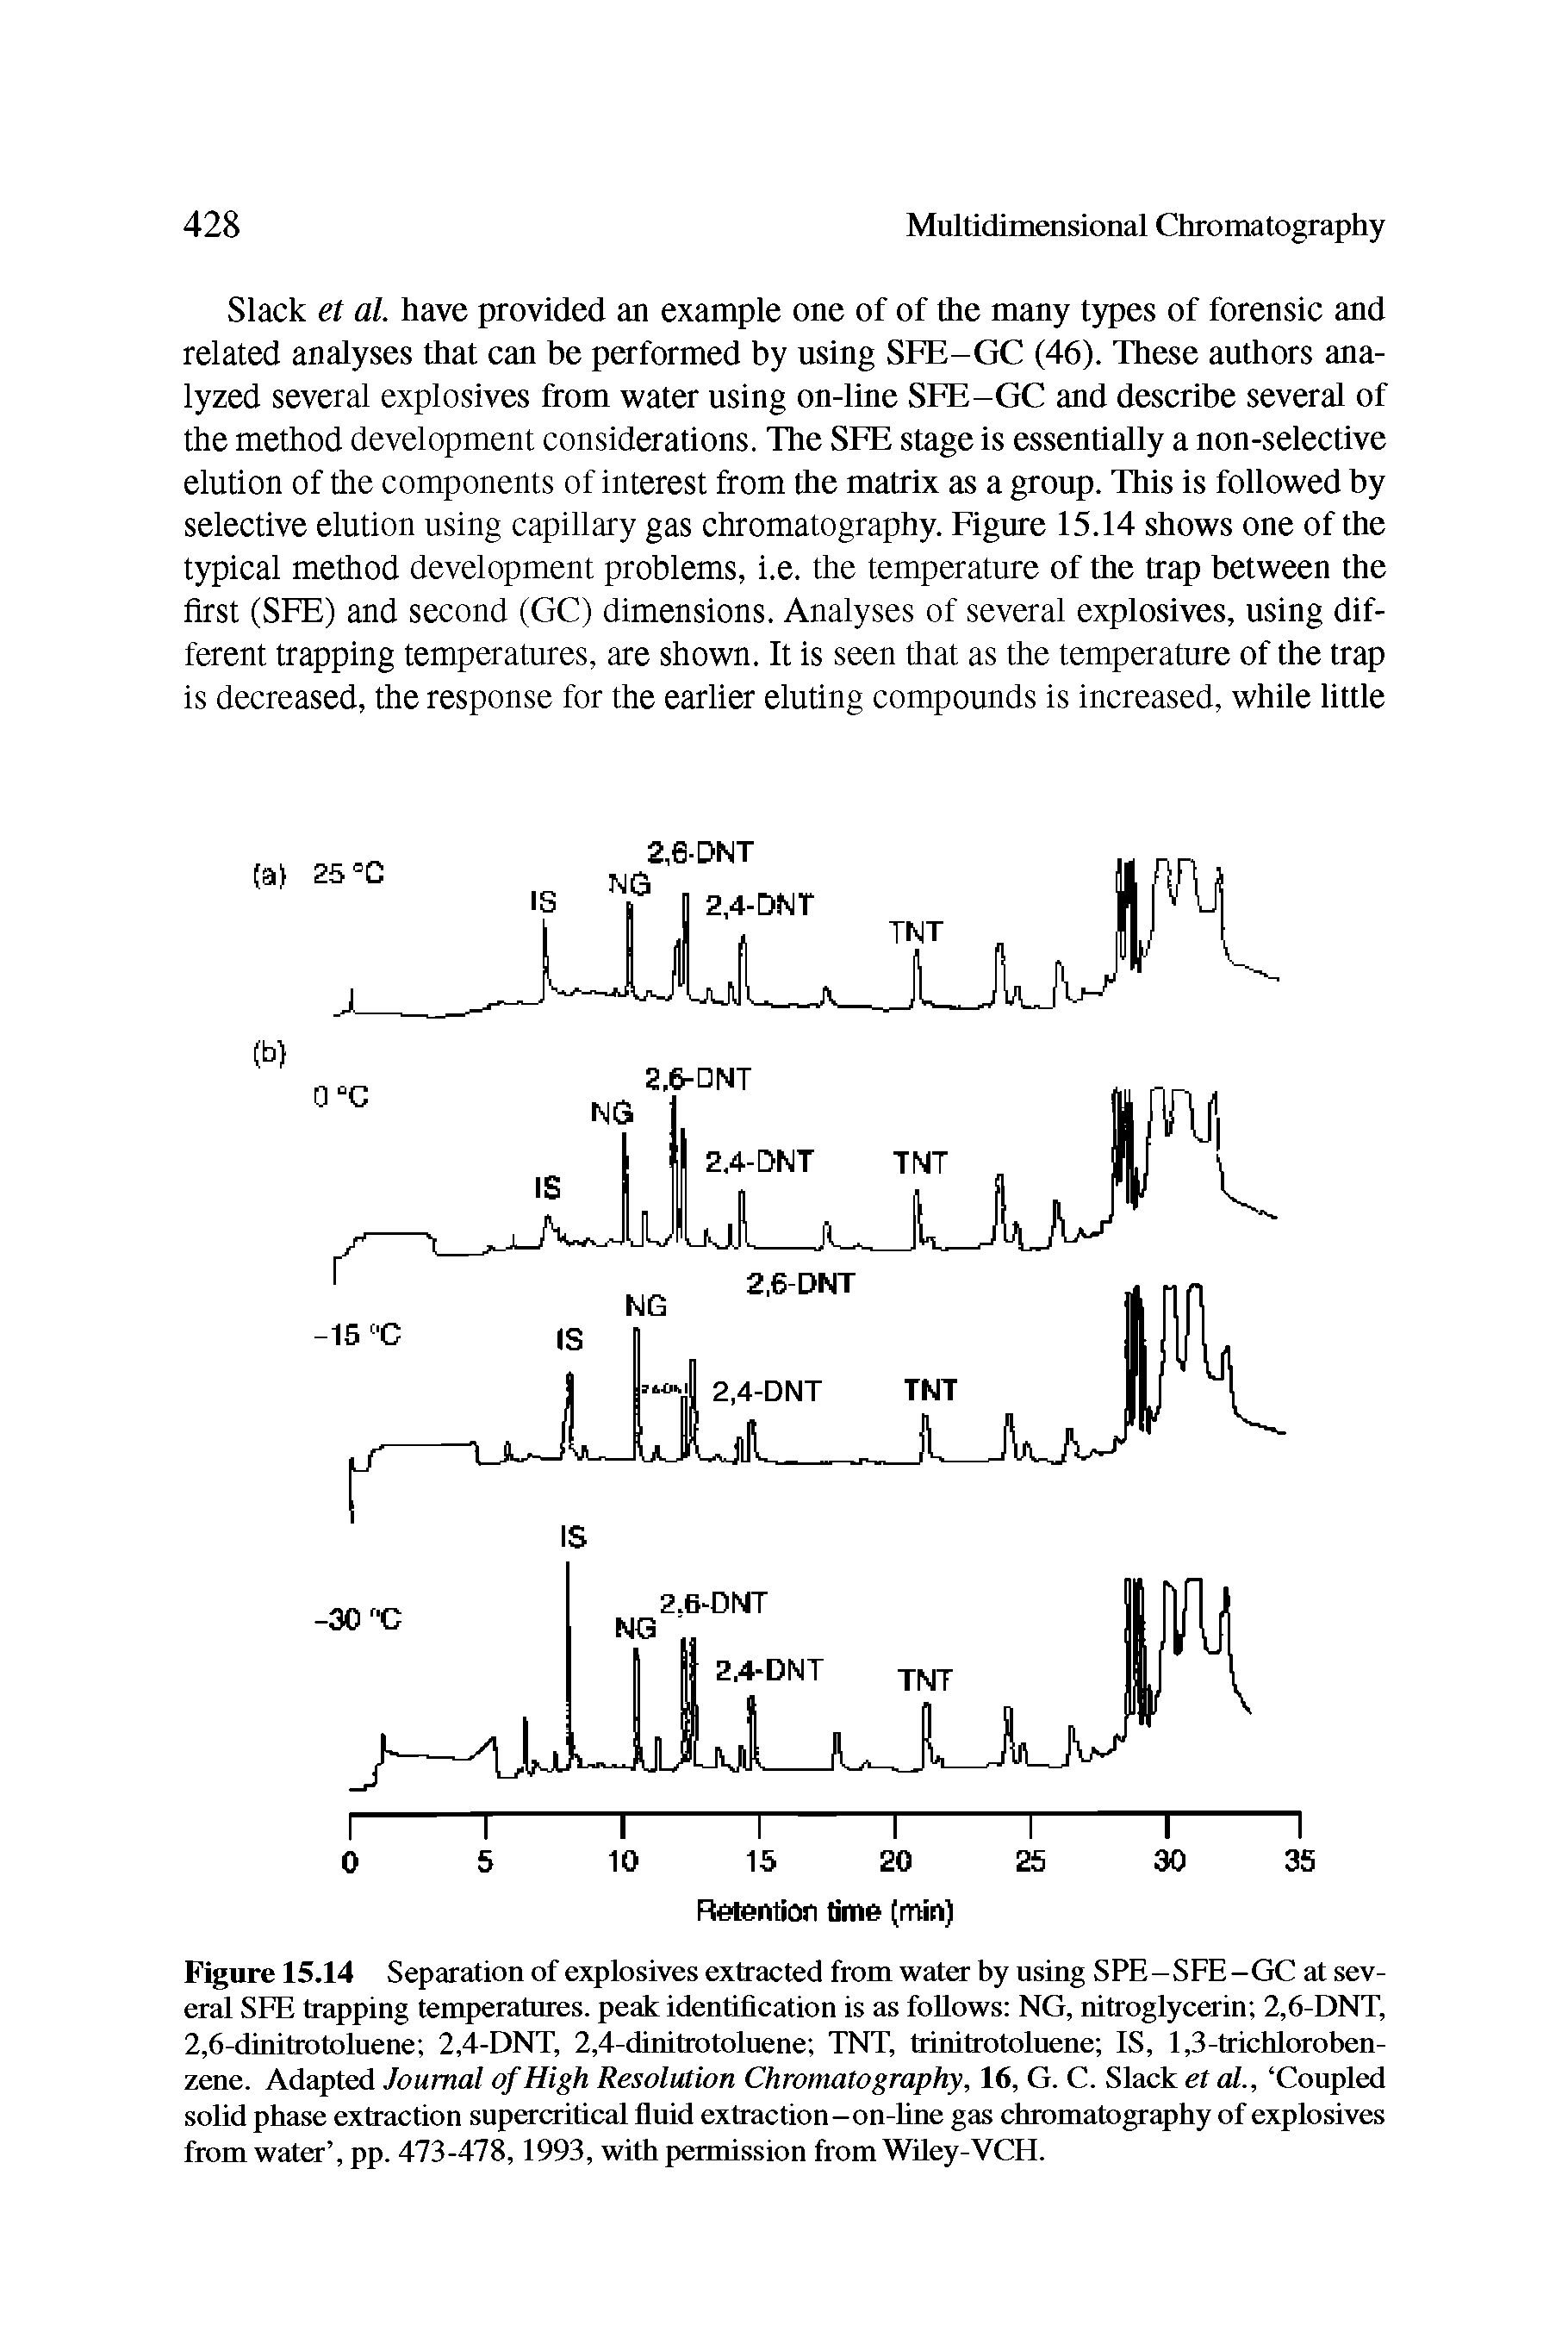 Figure 15.14 Separation of explosives extracted from water by using SPE-SFE-GC at several SFE trapping temperatures, peak identification is as follows NG, nitroglycerin 2,6-DNT, 2,6-dinitrotoluene 2,4-DNT, 2,4-dinitrotoluene TNT, trinitrotoluene IS, 1,3-trichloroben-zene. Adapted Journal of High Resolution Chromatography, 16, G. C. Slack et al., Coupled solid phase extraction supercritical fluid extraction-on-line gas chromatography of explosives from water , pp. 473-478,1993, with permission from Wiley-VCH.